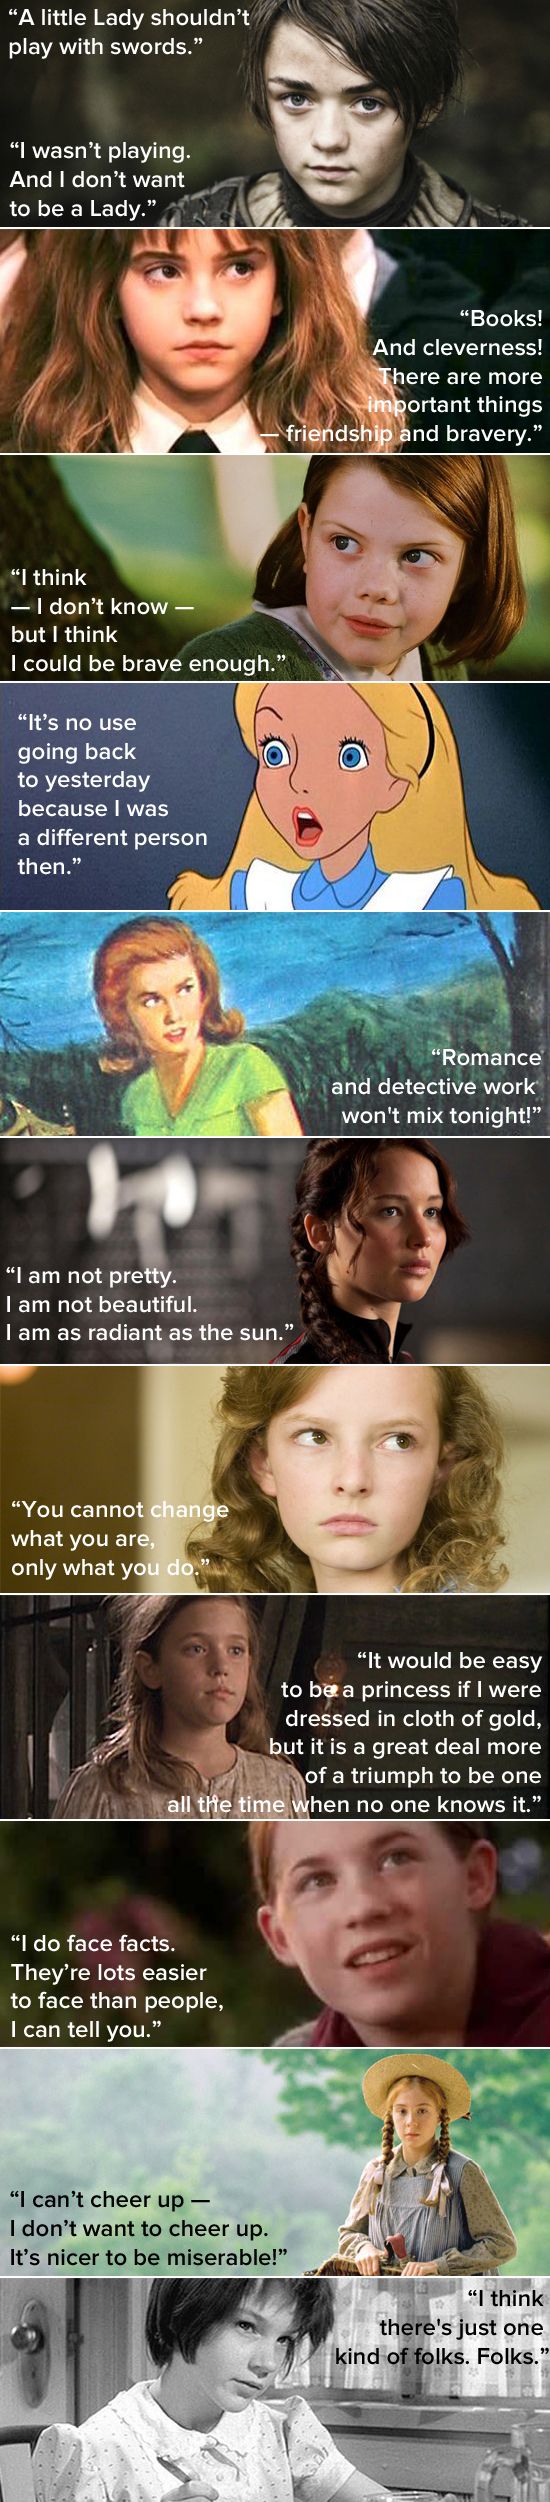 Quotes from Strong Girls in Literature